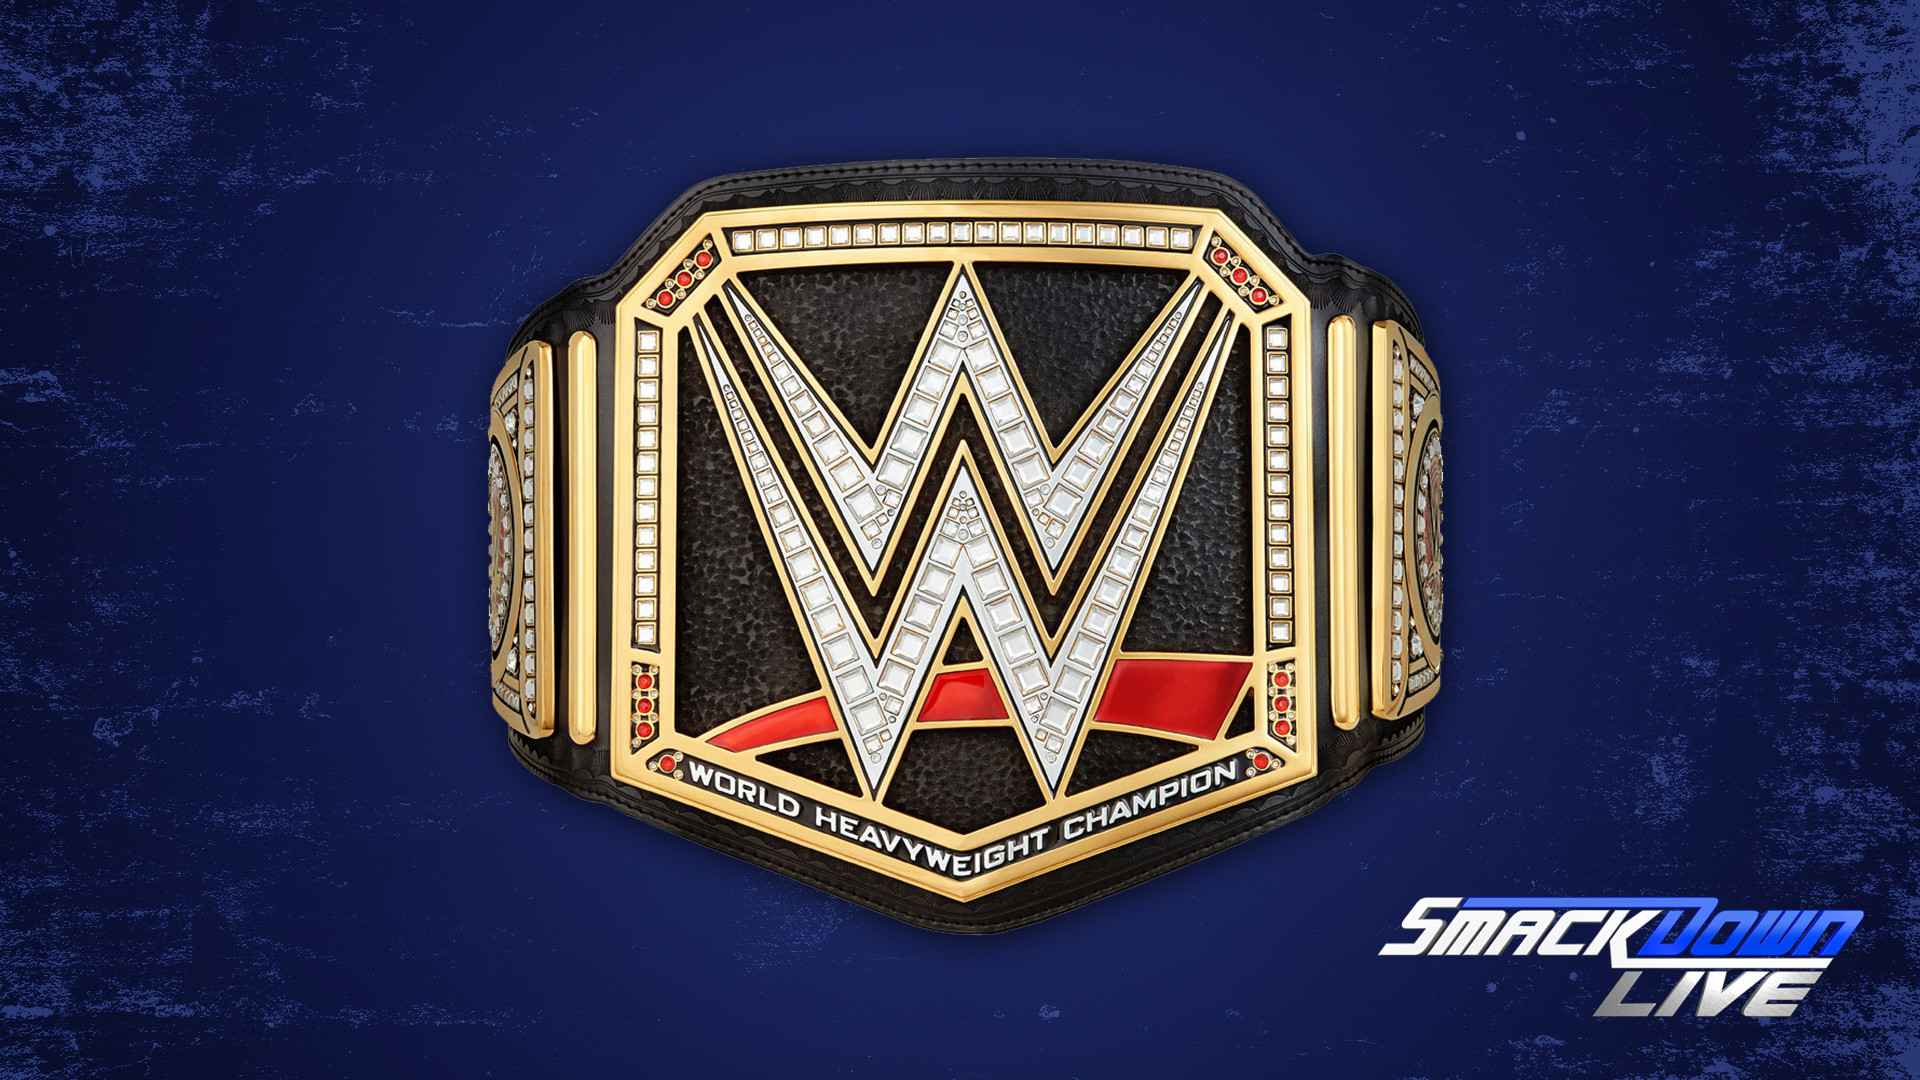 WWE Smackdown Wallpapers (73+ pictures)